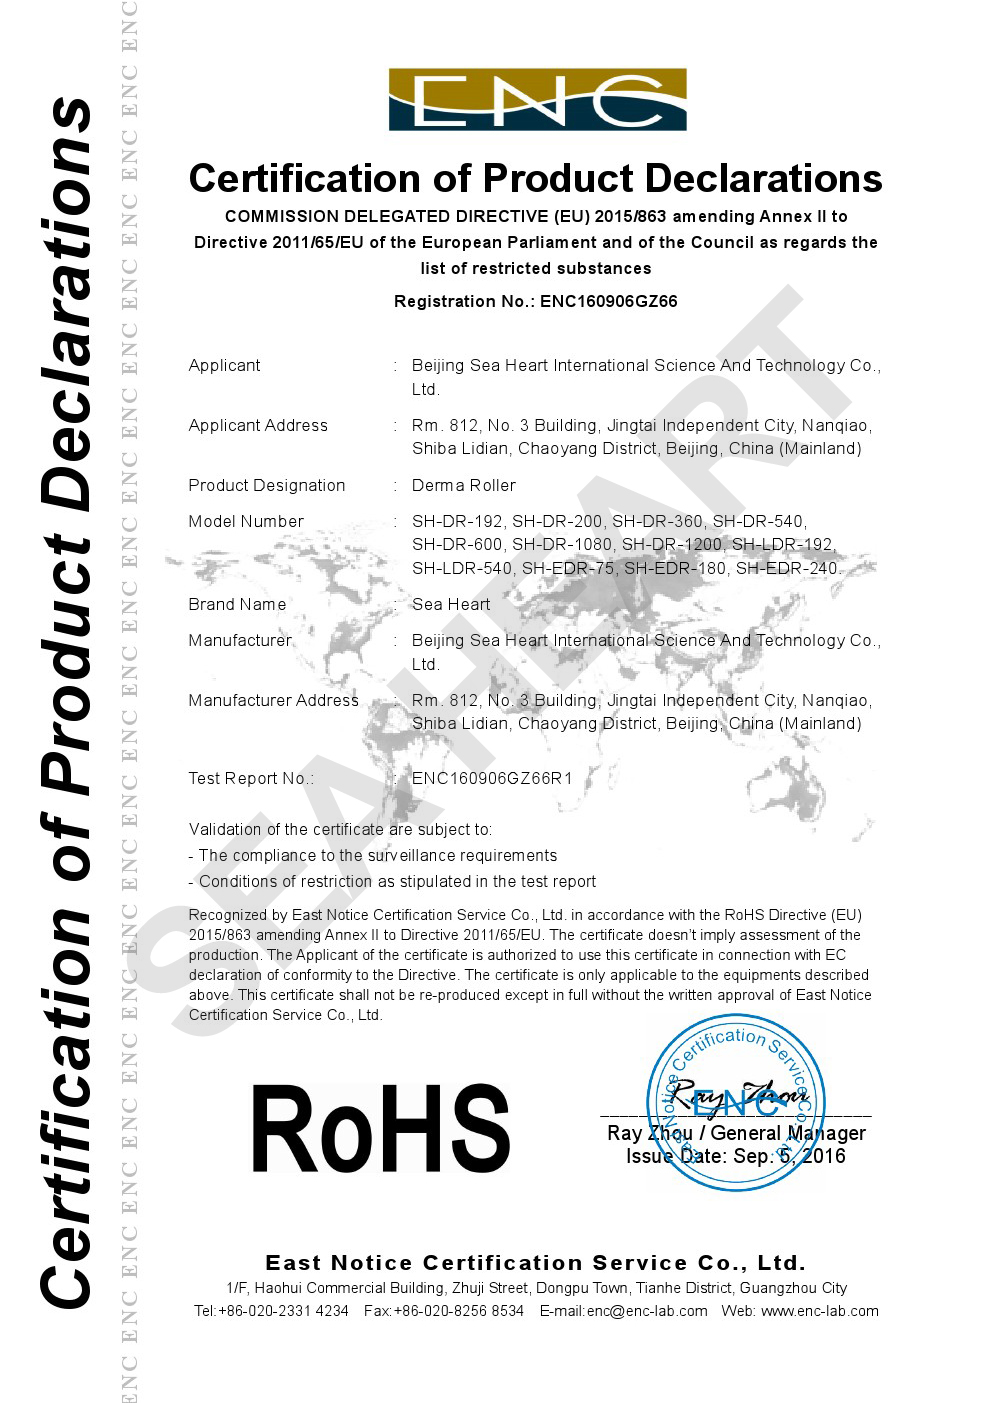 ROHS certificate of beauty devices